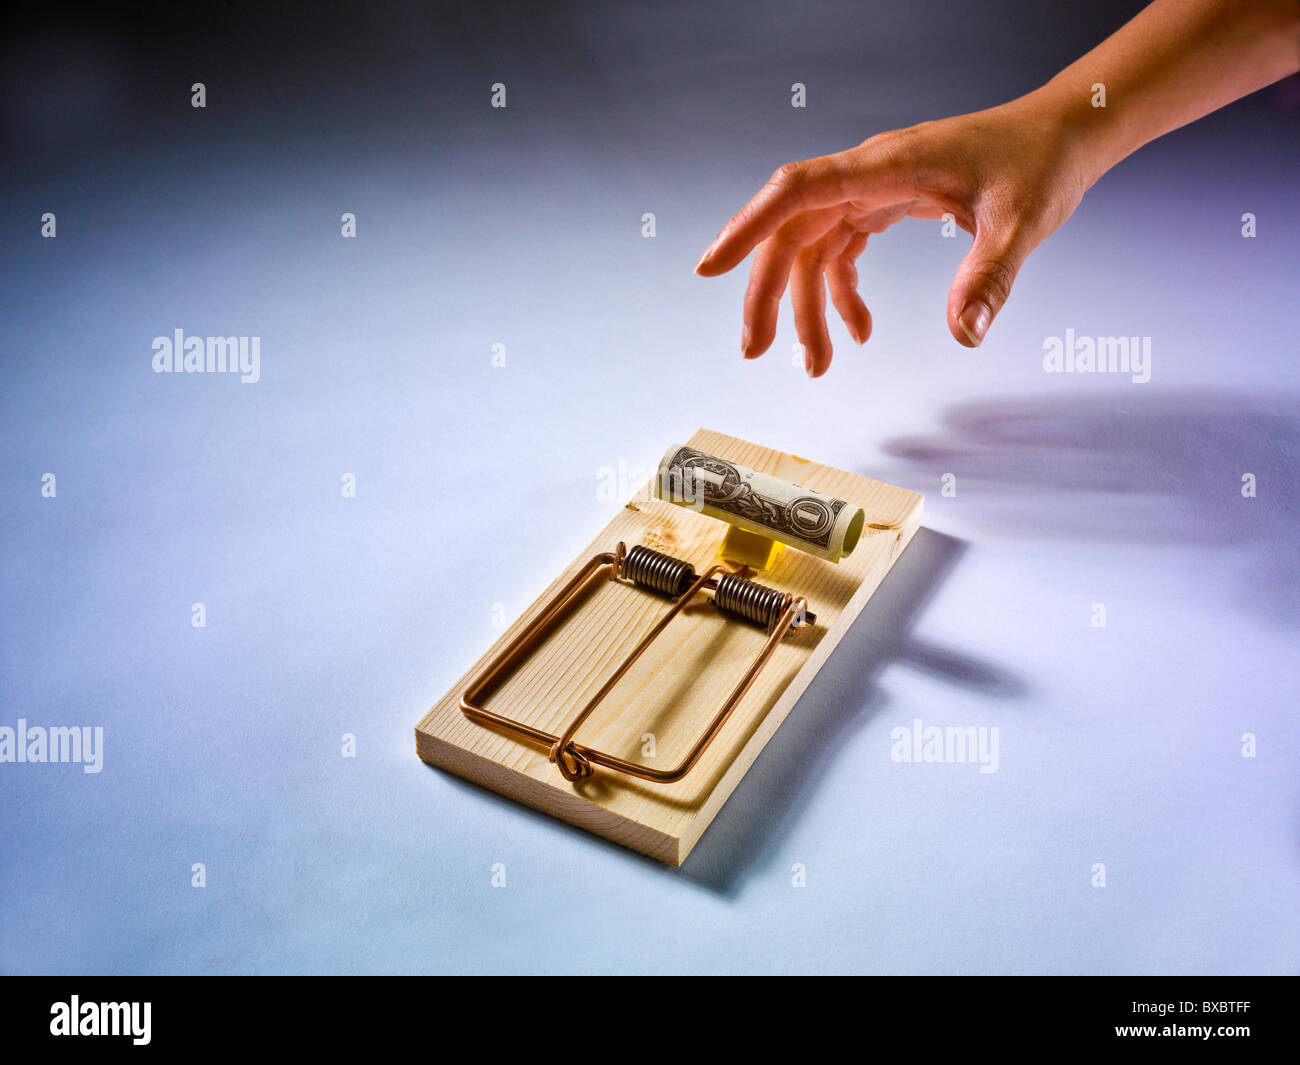 Hand attempting to remove money from large mouse trap Stock Photo